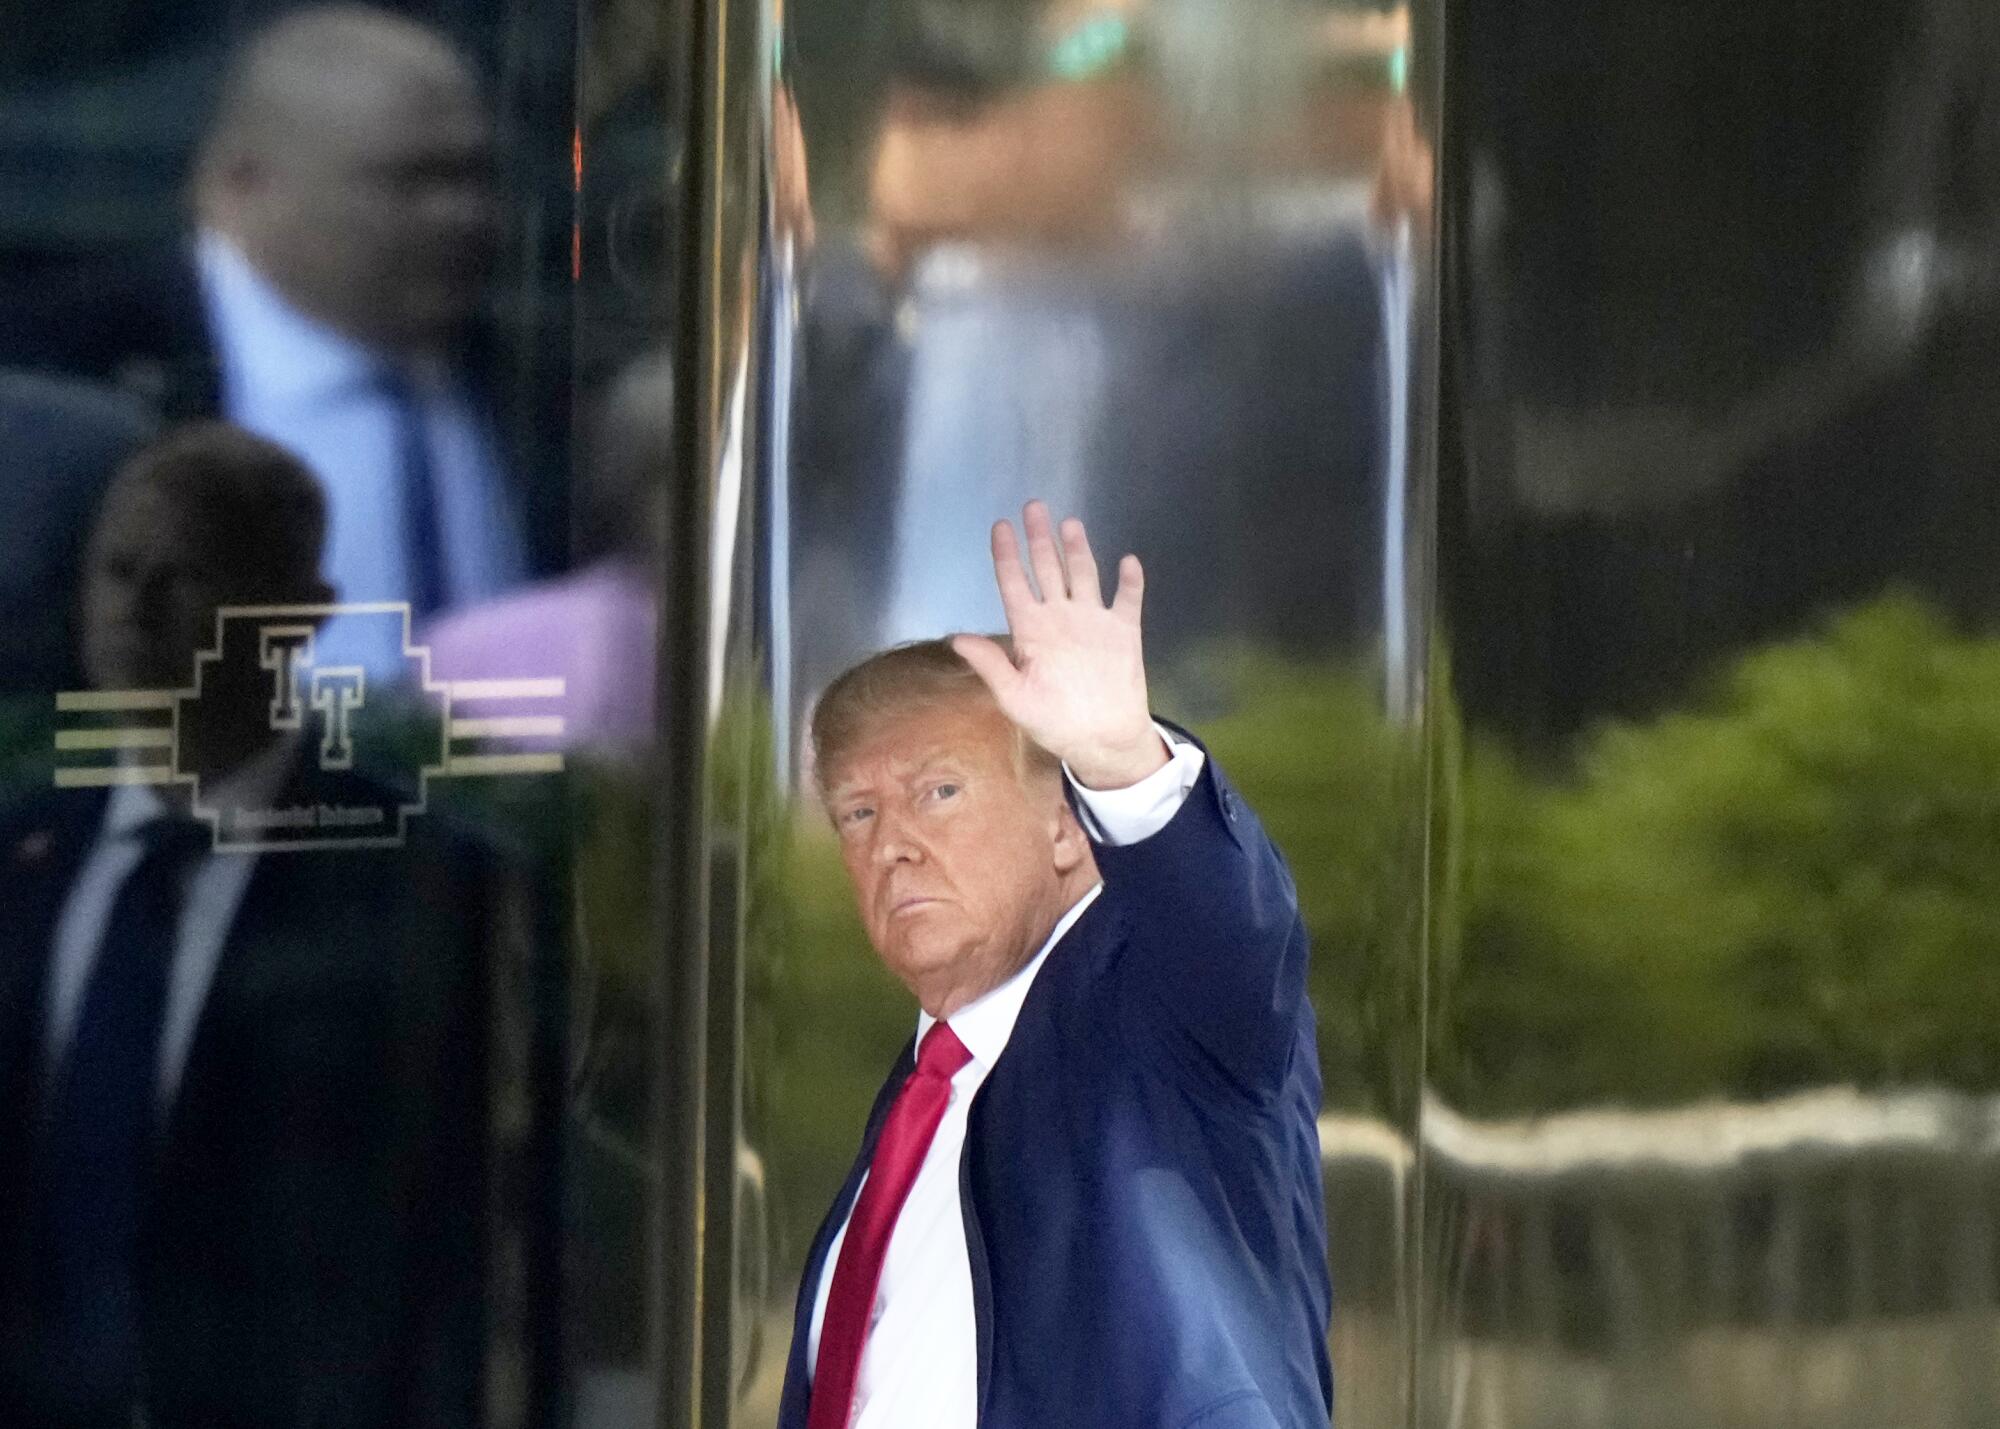 Donald Trump arrives at Trump Tower waving with his left arm while looking at the camera.